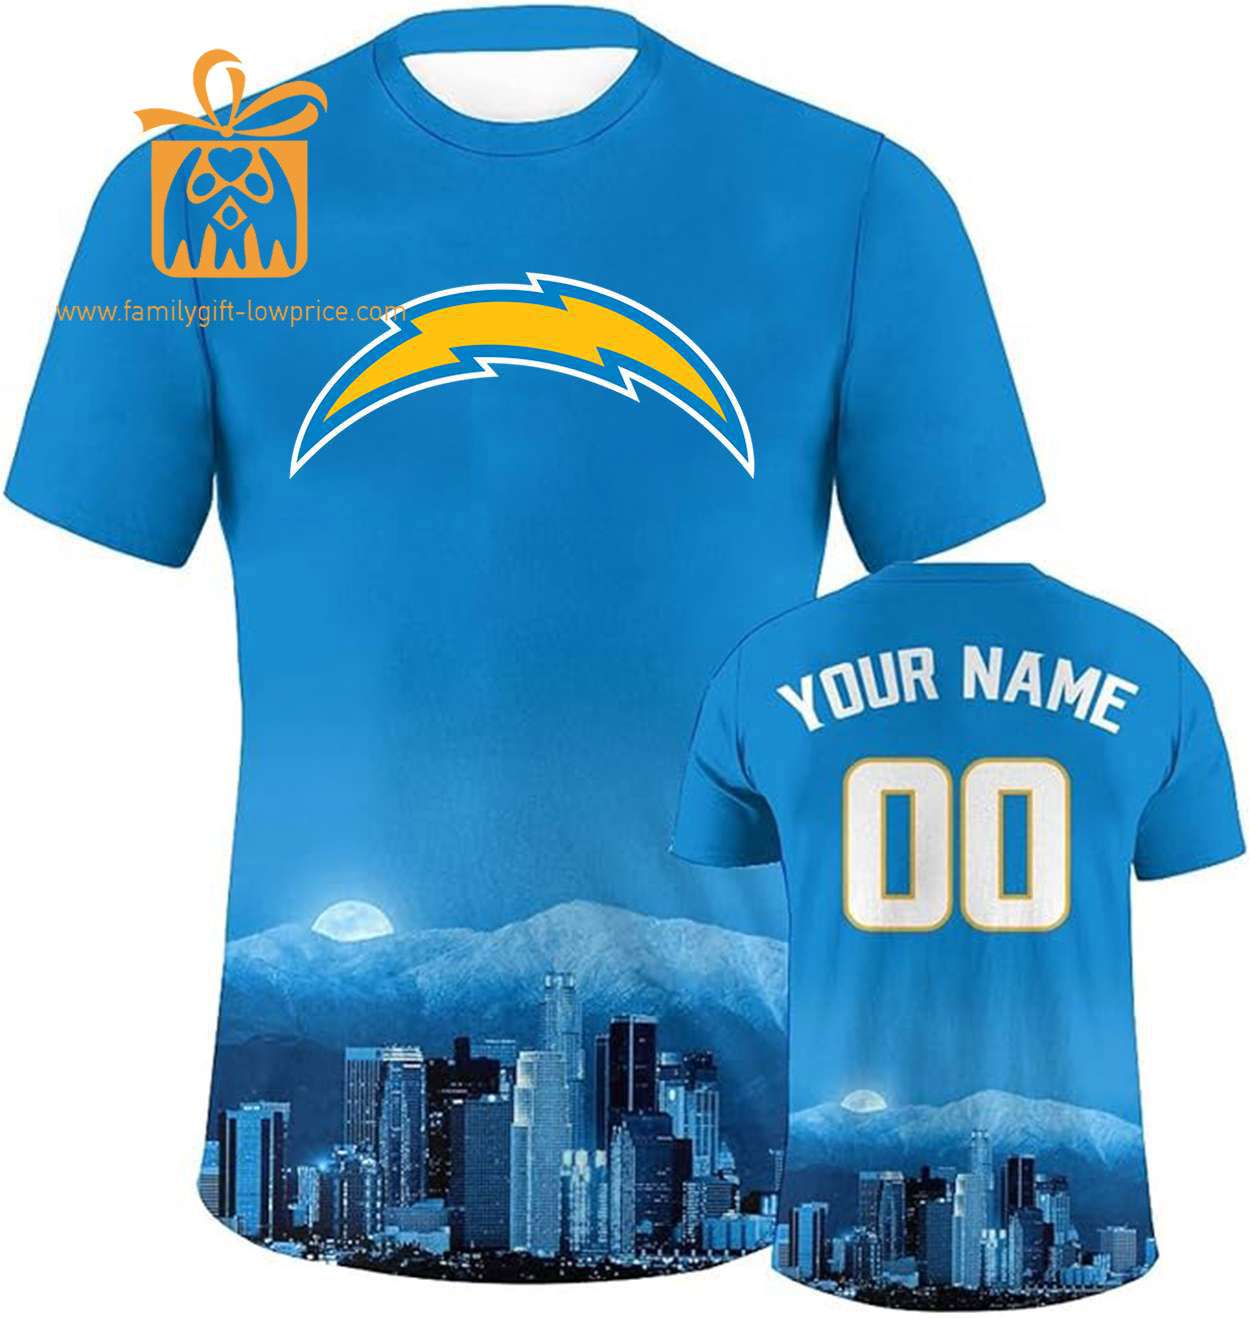 Los Angeles Chargers Custom Football Shirts – Personalized Name & Number, Ideal for Fans